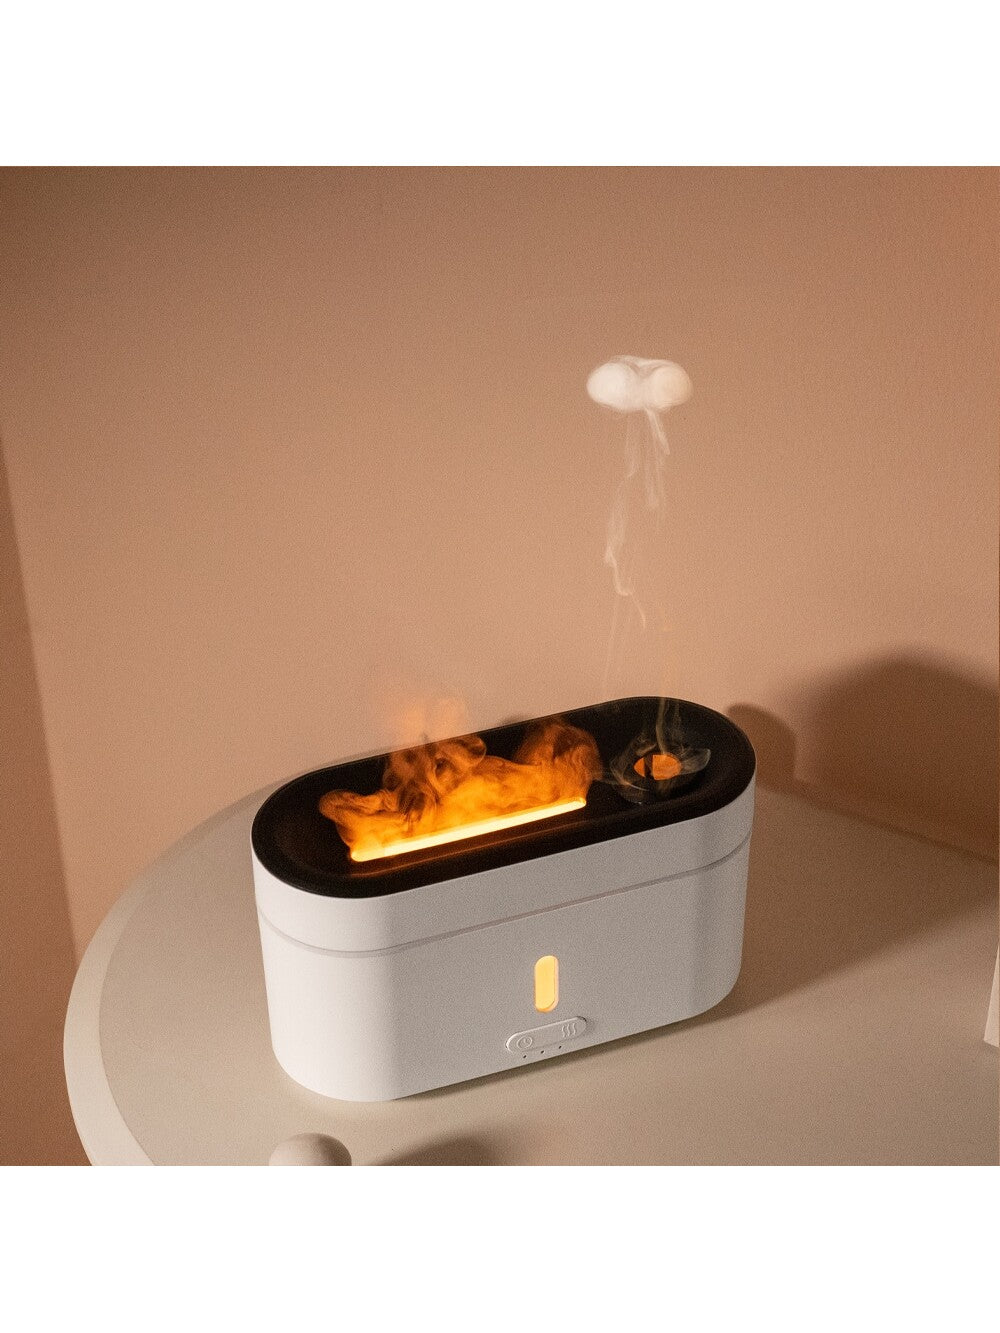 1pc Desktop Aromatherapy Humidifier With Flameless Design For Bedroom, Office, Large Capacity, Realistic Led Flame Effect, Portable, 300ml Capacity, Use With Essential Oil, Ultrasonic Atomization, Non-wetting, White Color, With 300ml Water Tank,-White-1